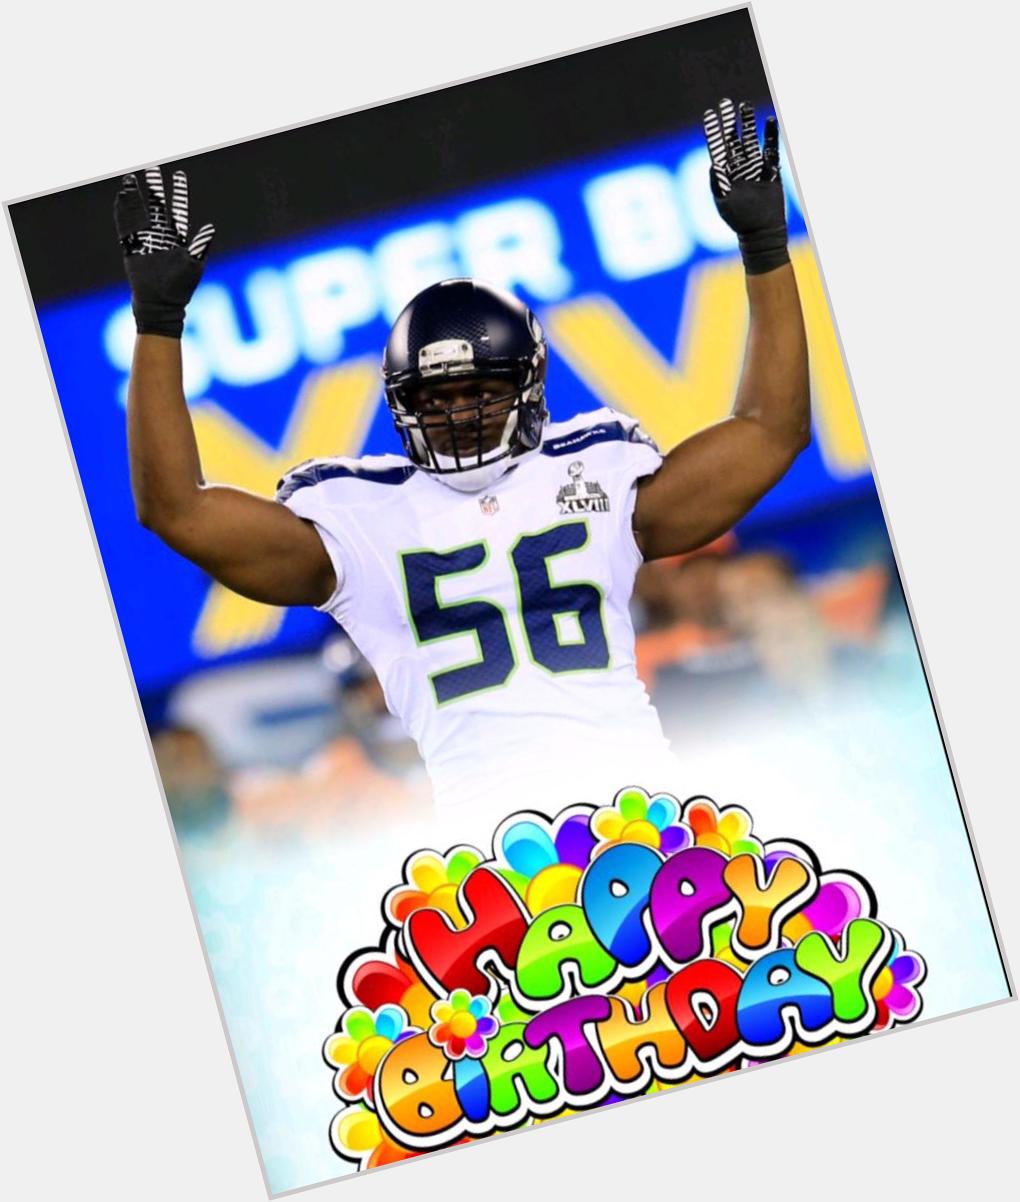 Happy Birthday to Cliff Avril! Over his career he has 211 tackles, forced 22 fumbles, has 52.5 sacks, and a SB ring! 